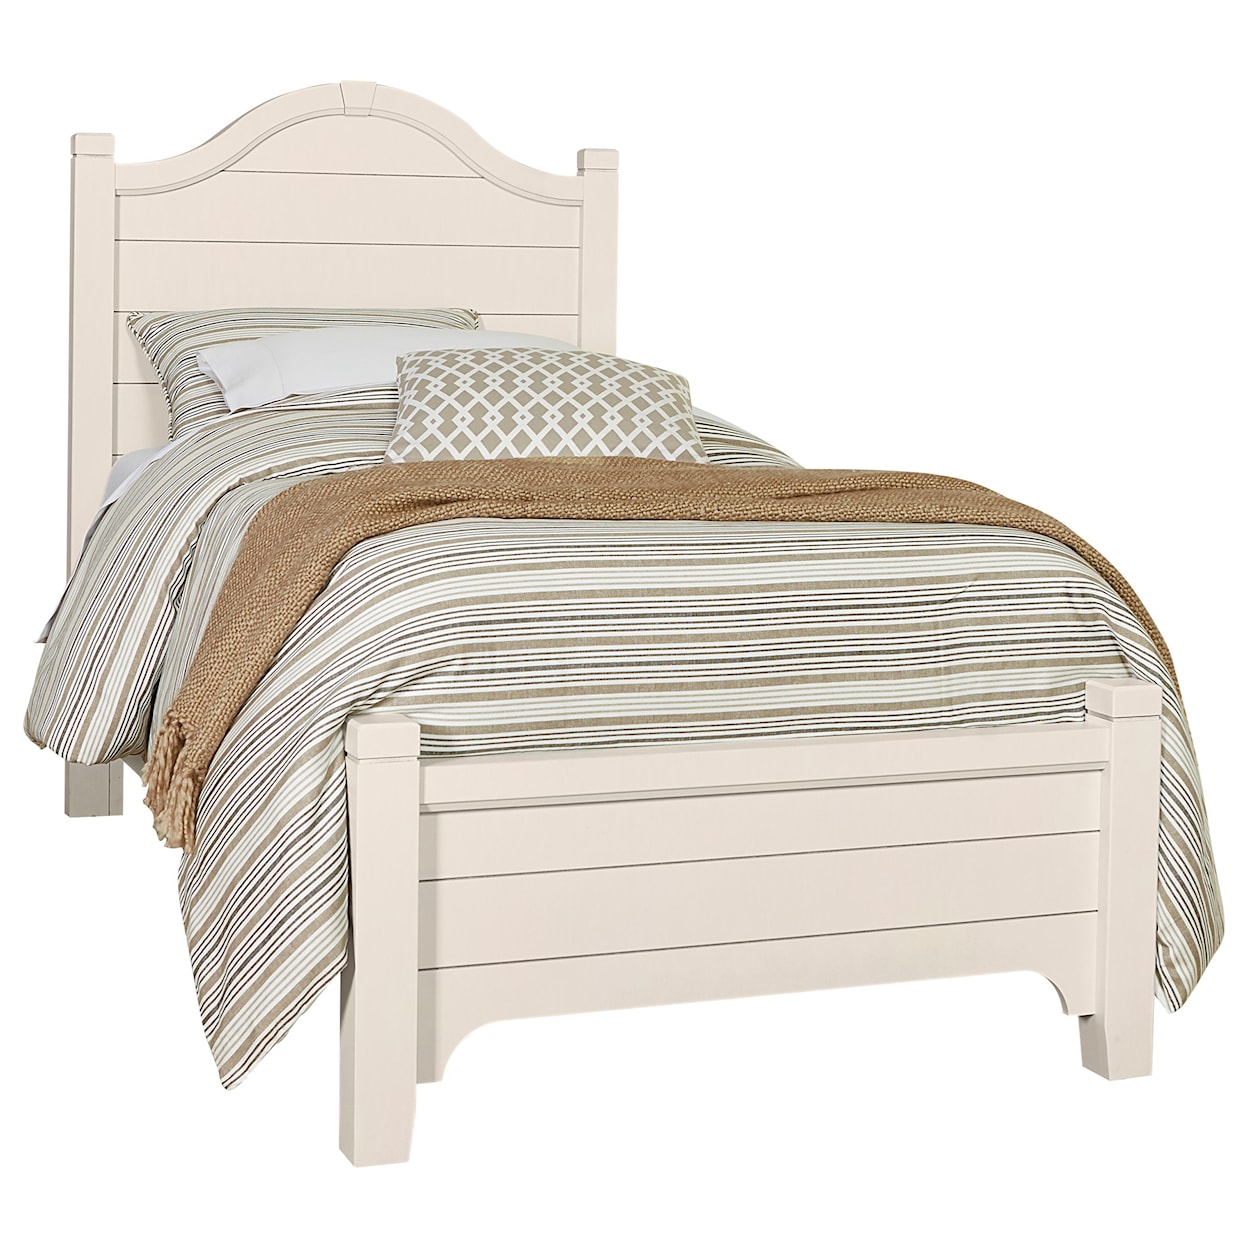 Vaughan-Bassett Bungalow Full Arch Bed with Low Profile Footboard